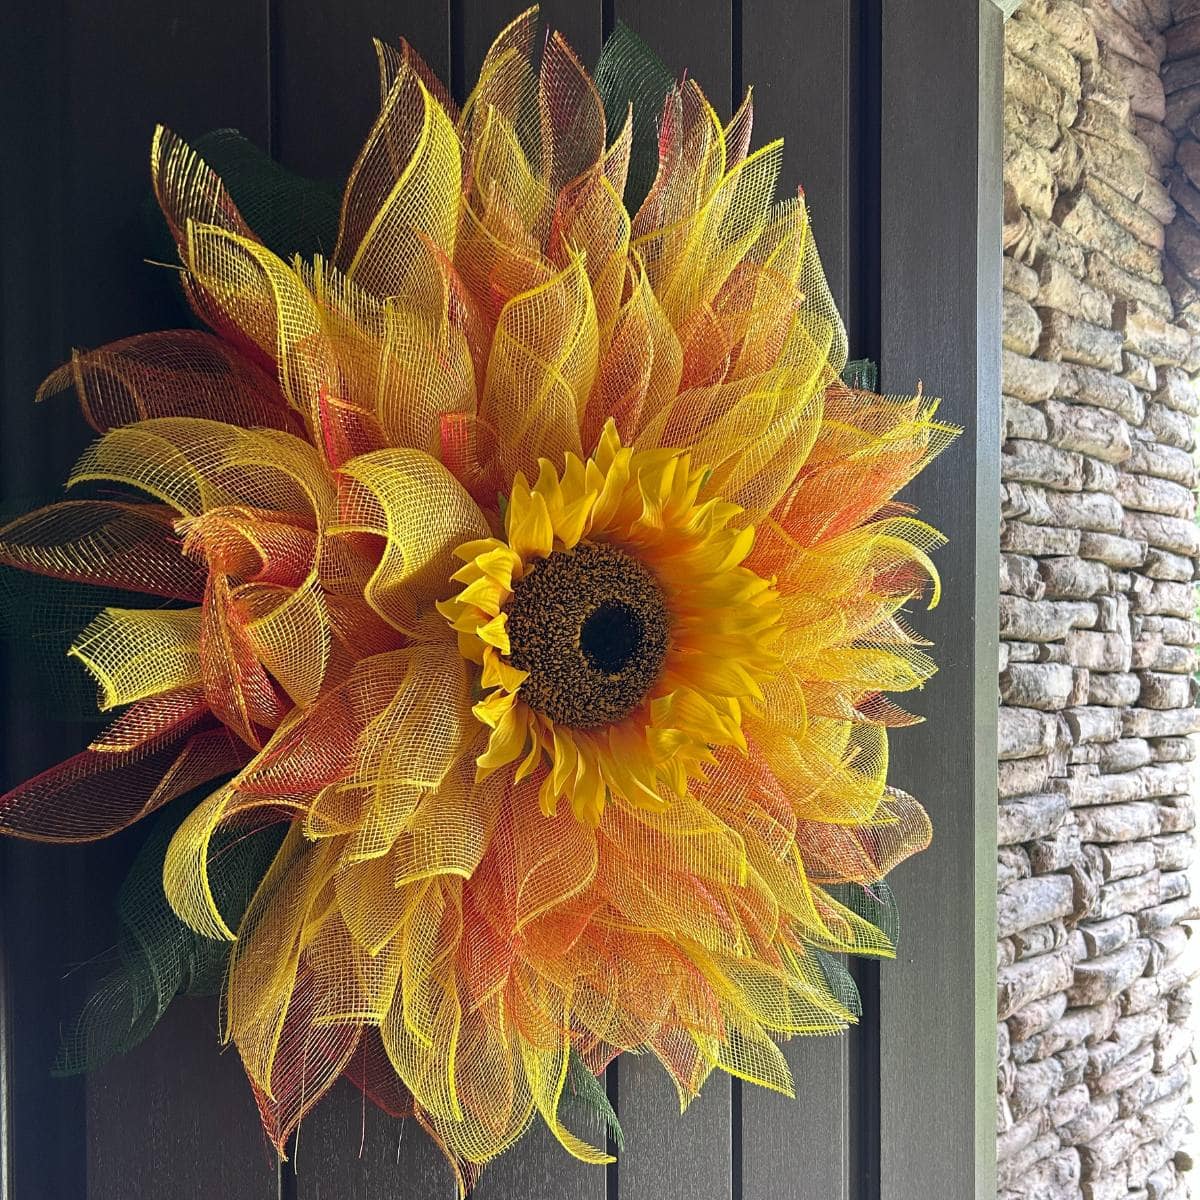 Sunflower Wreath: A Charming Welcome to Your Home